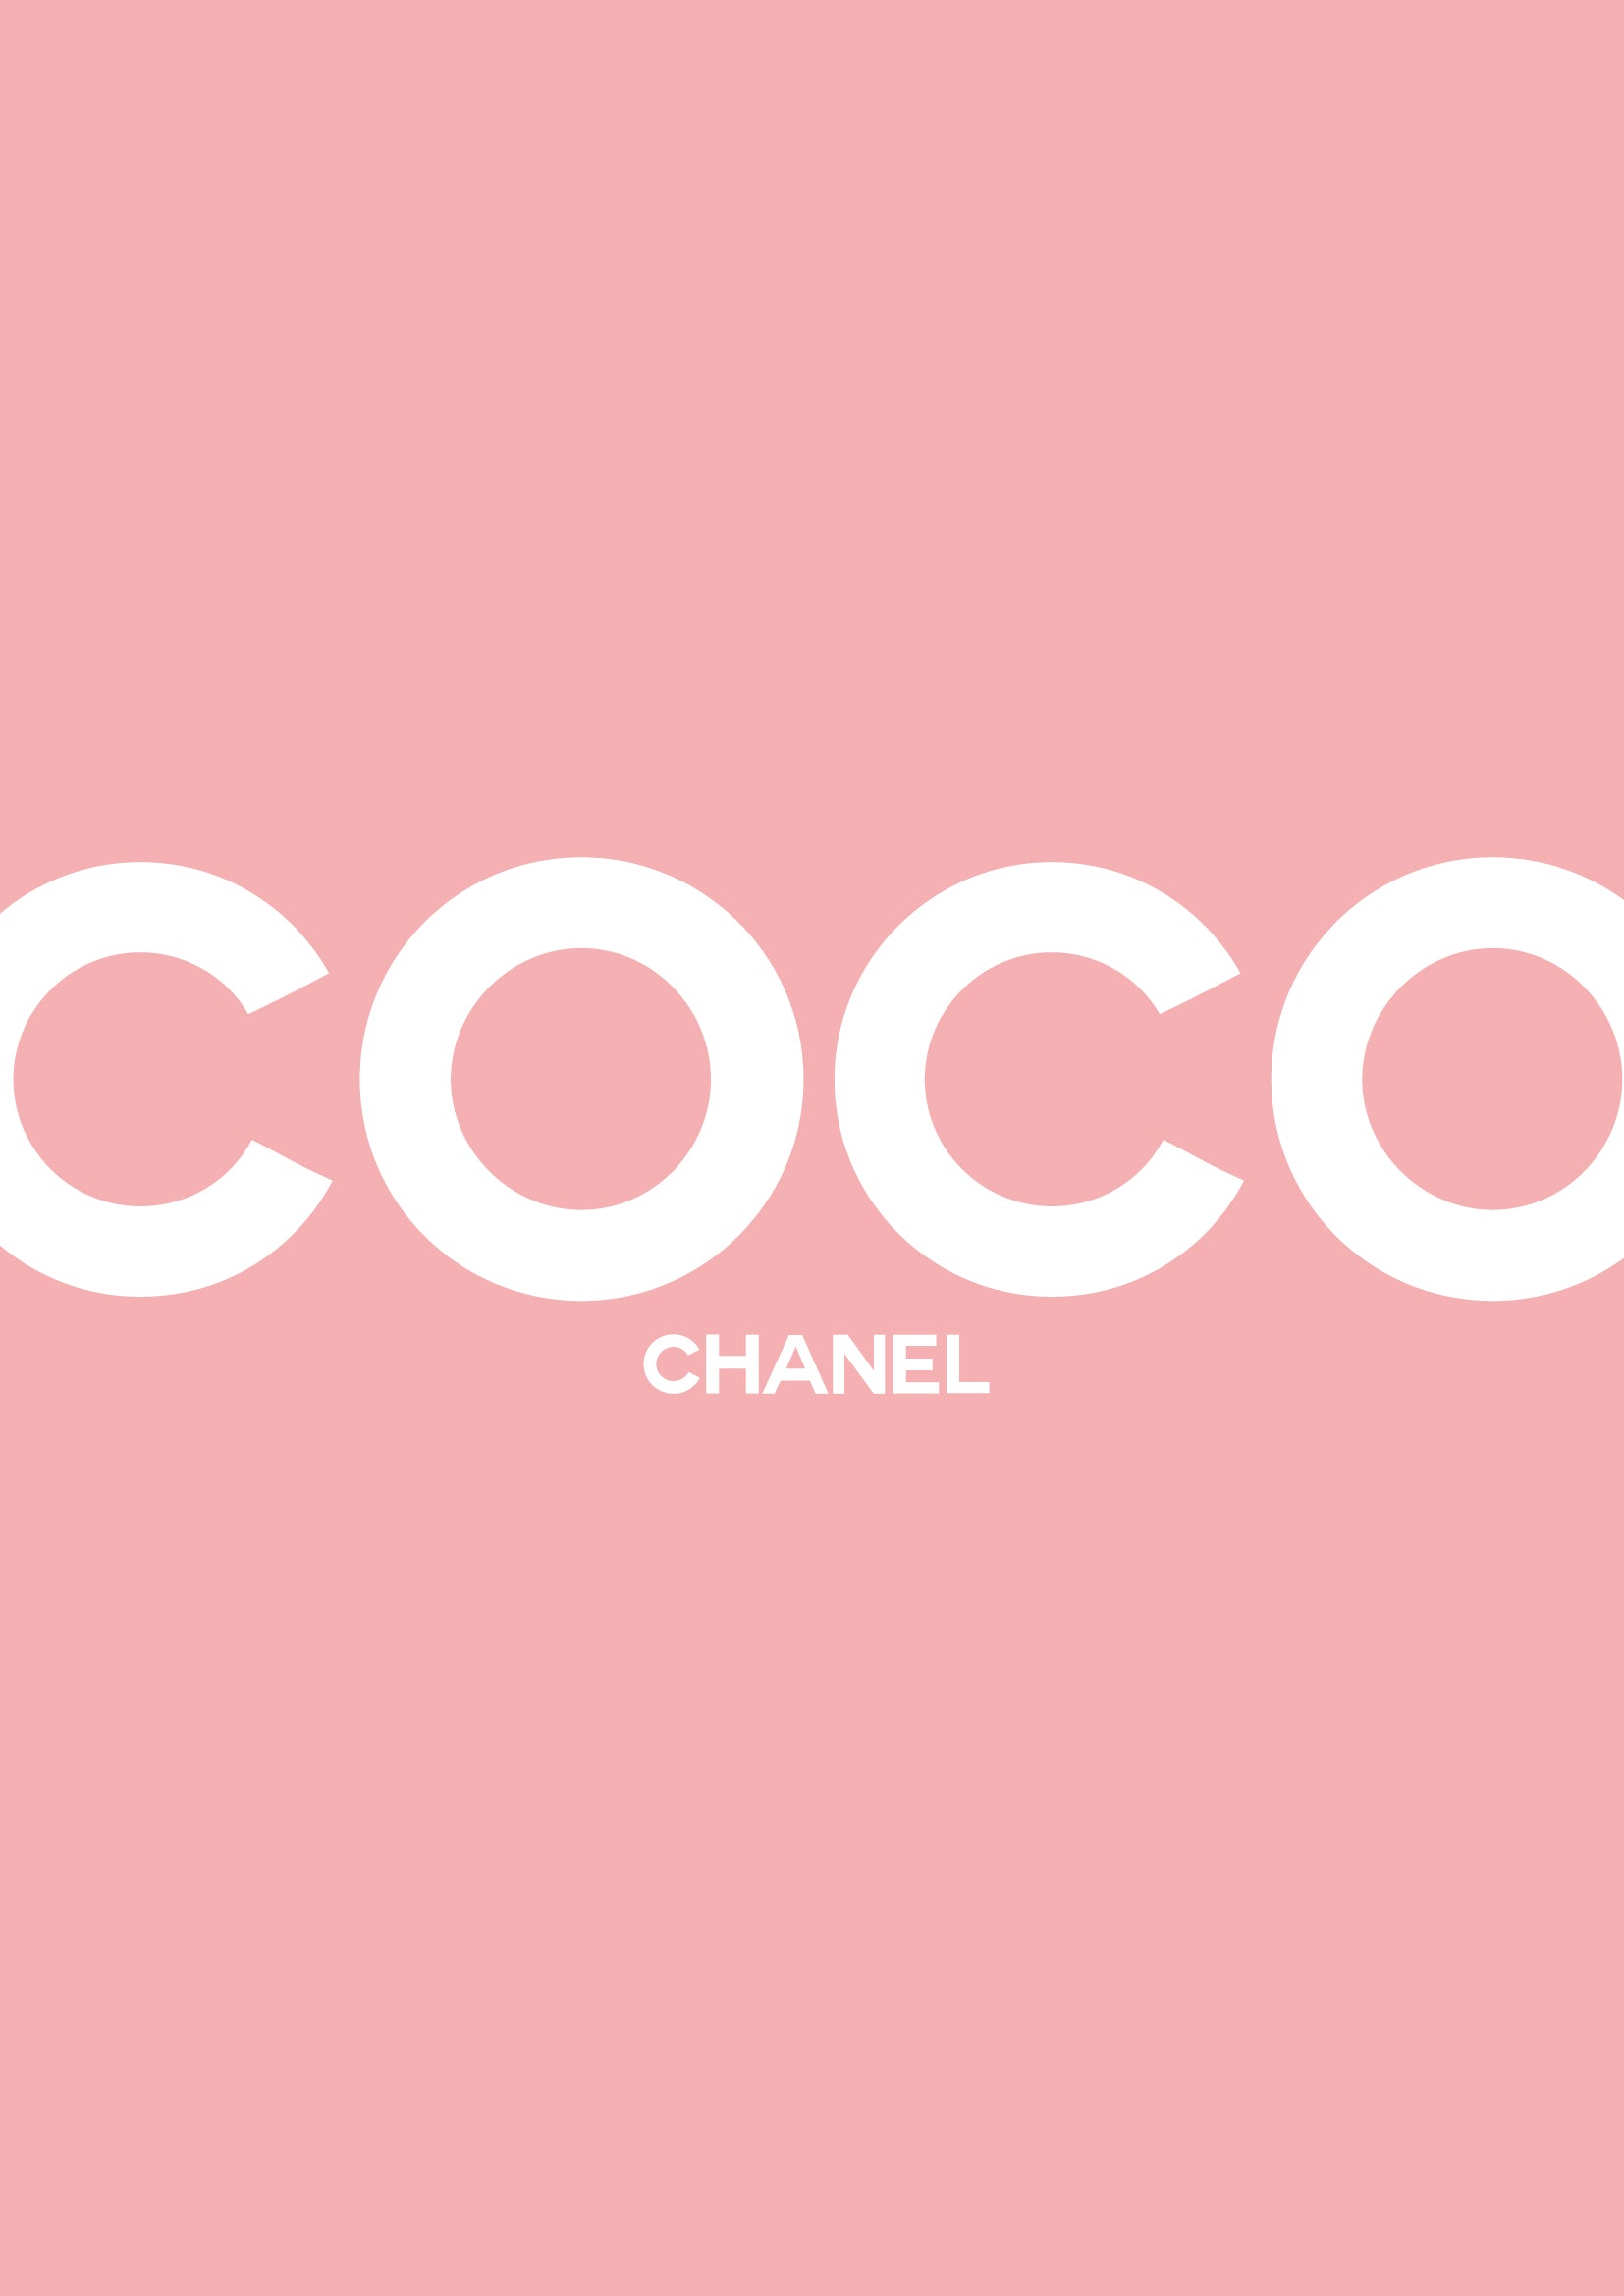 Coco Chanel Quote Poster by dkDesign  Displate